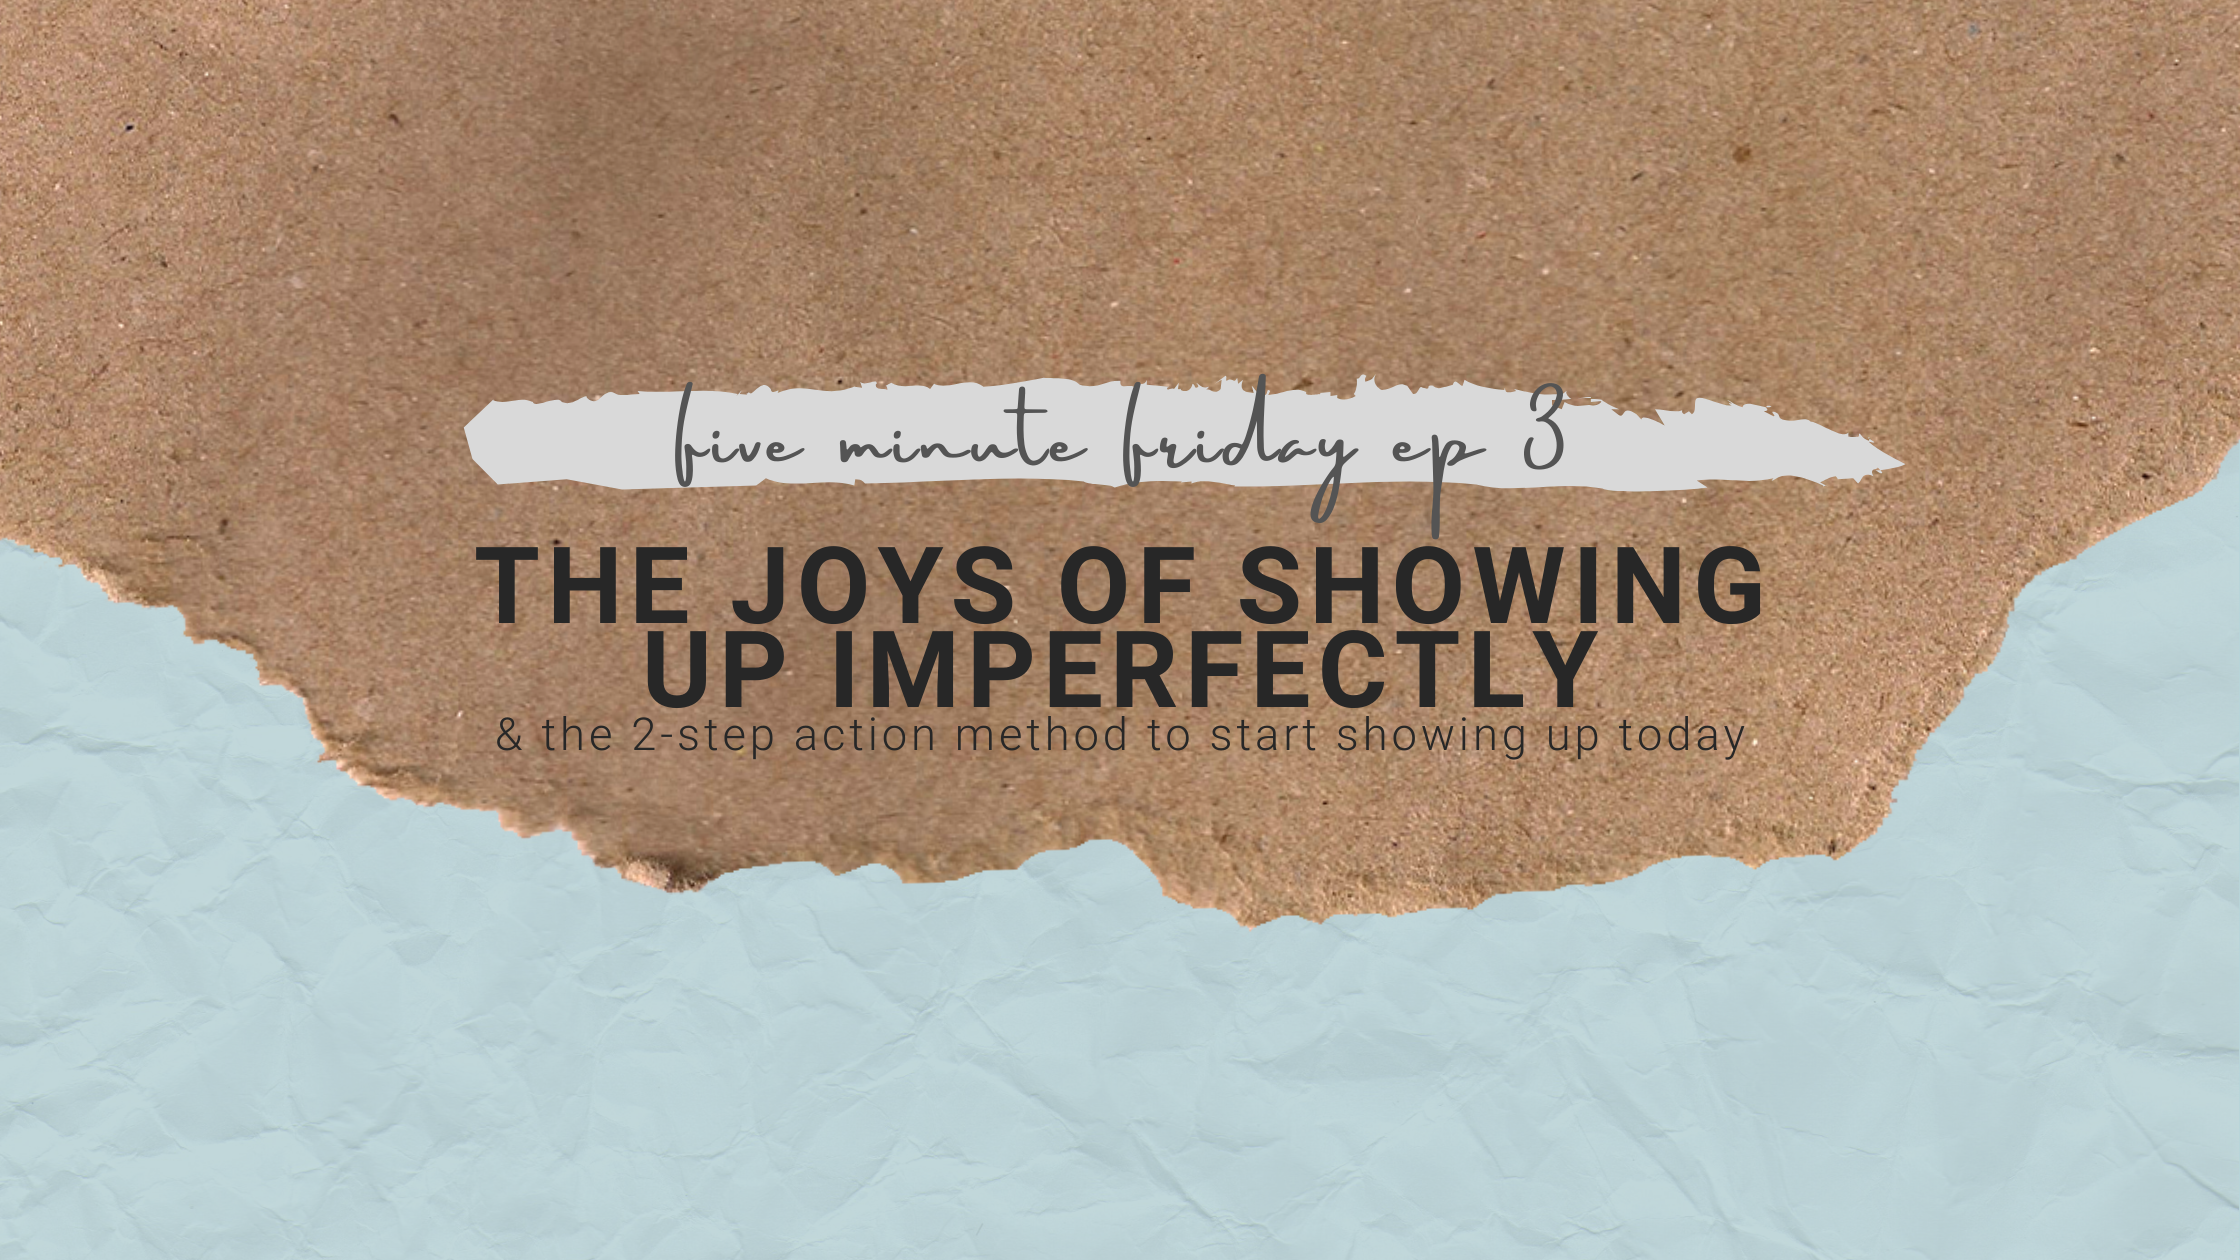 You are currently viewing They joy of showing up imperfectly – Five Minute Friday Ep 3